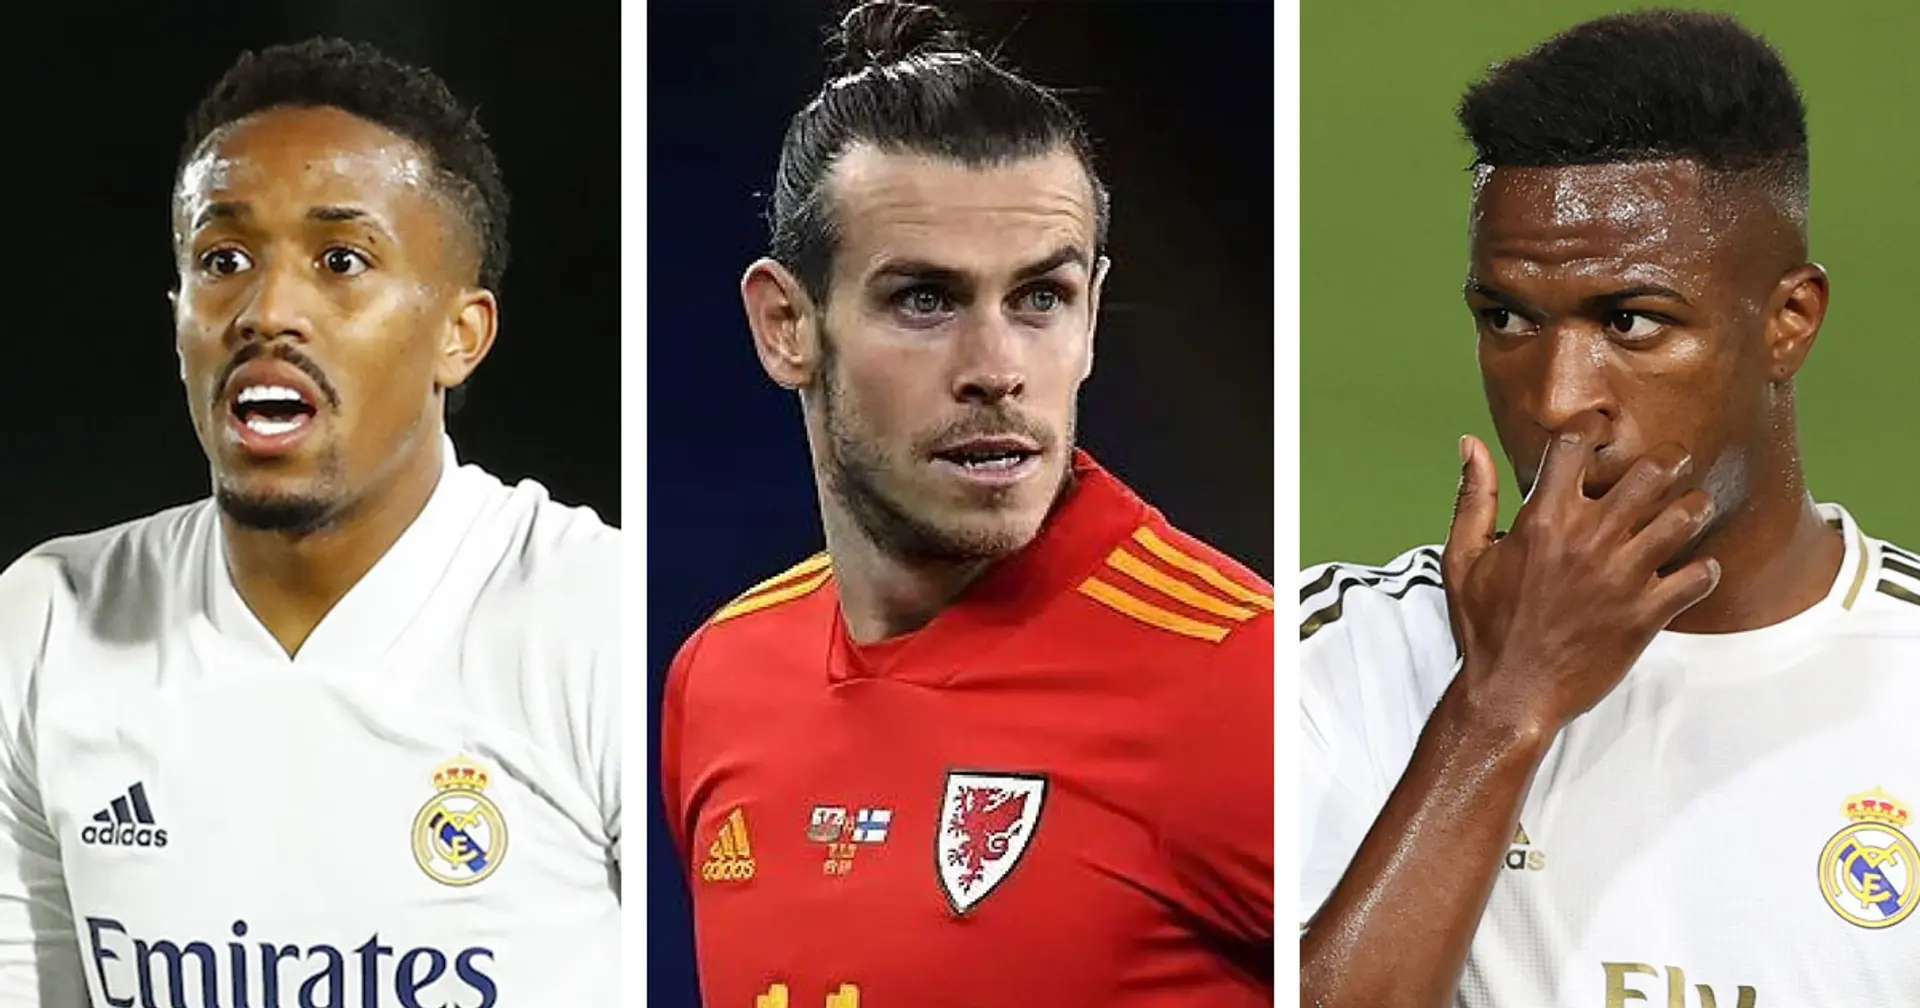 Explained: Madrid might not be able to register one of Militao, Vinicius or Rodrygo if Bale stays